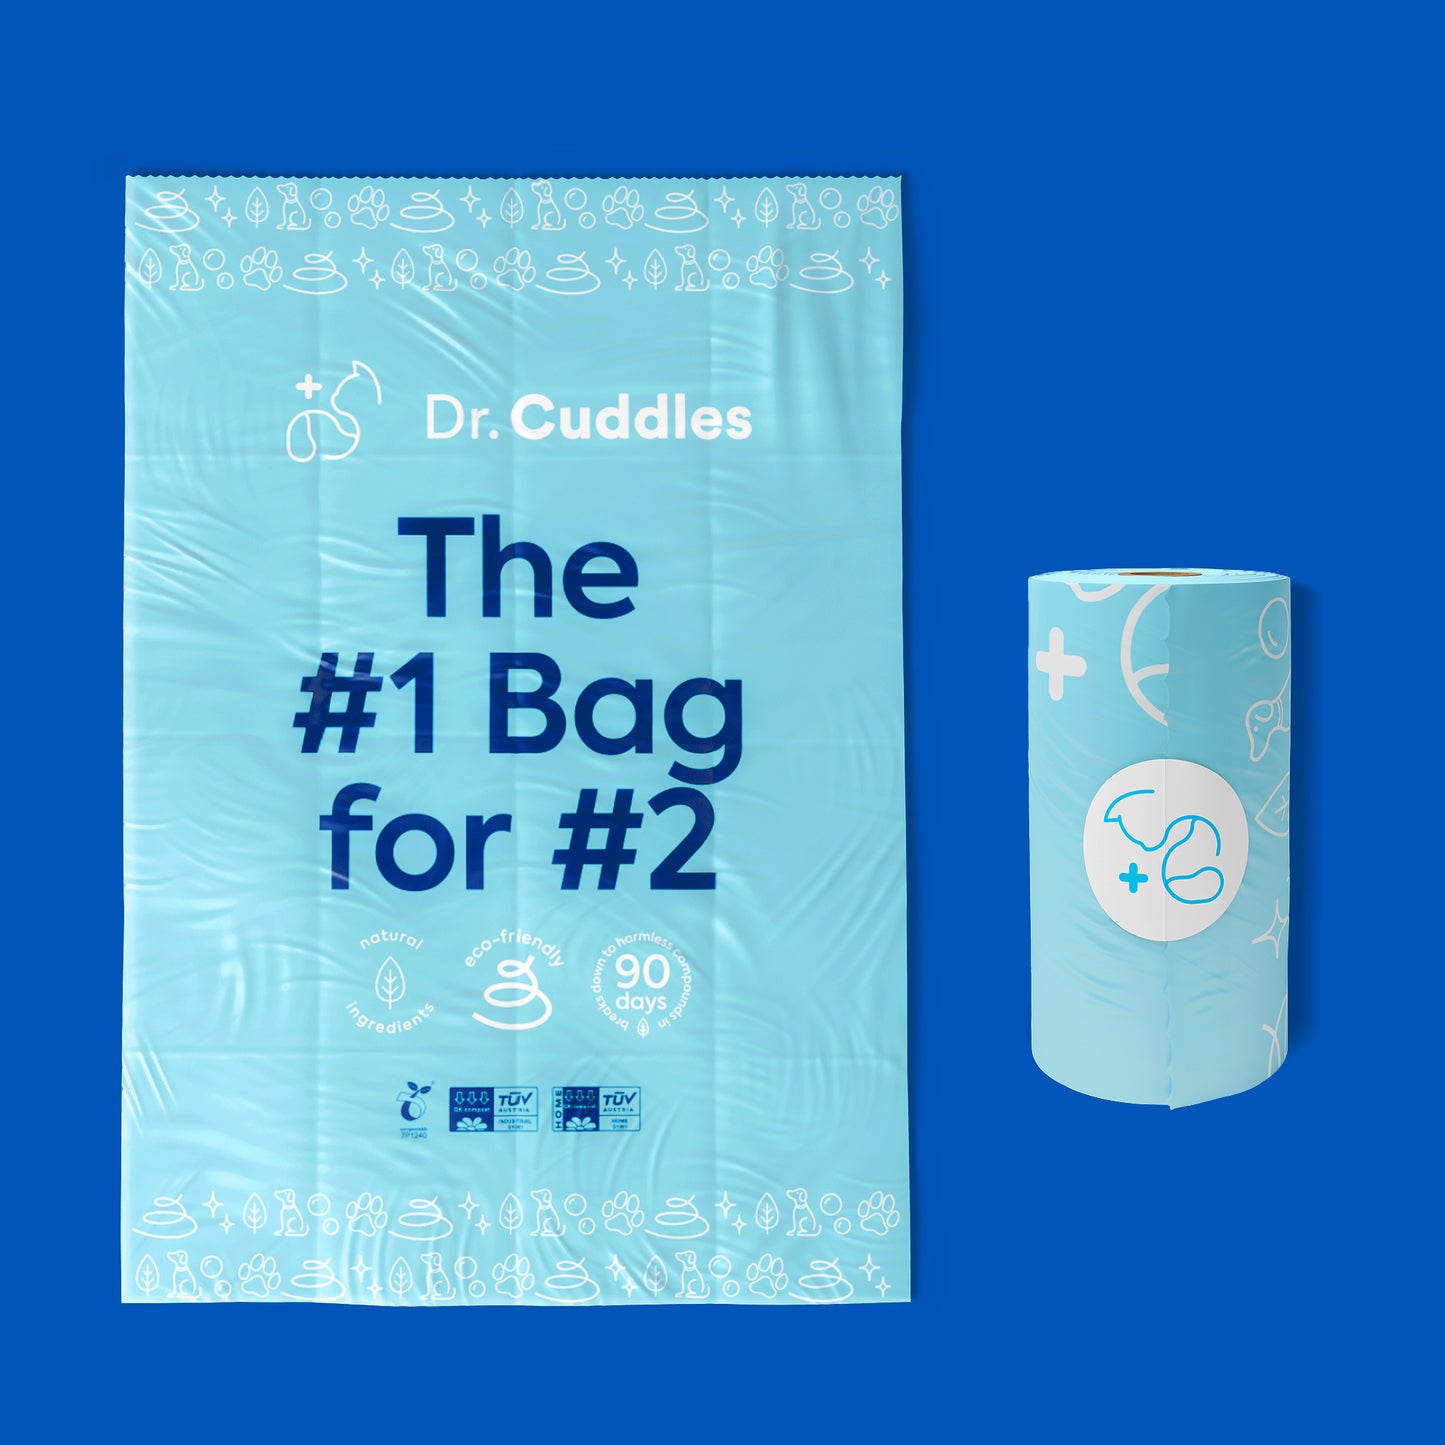 The #1 bag for #2